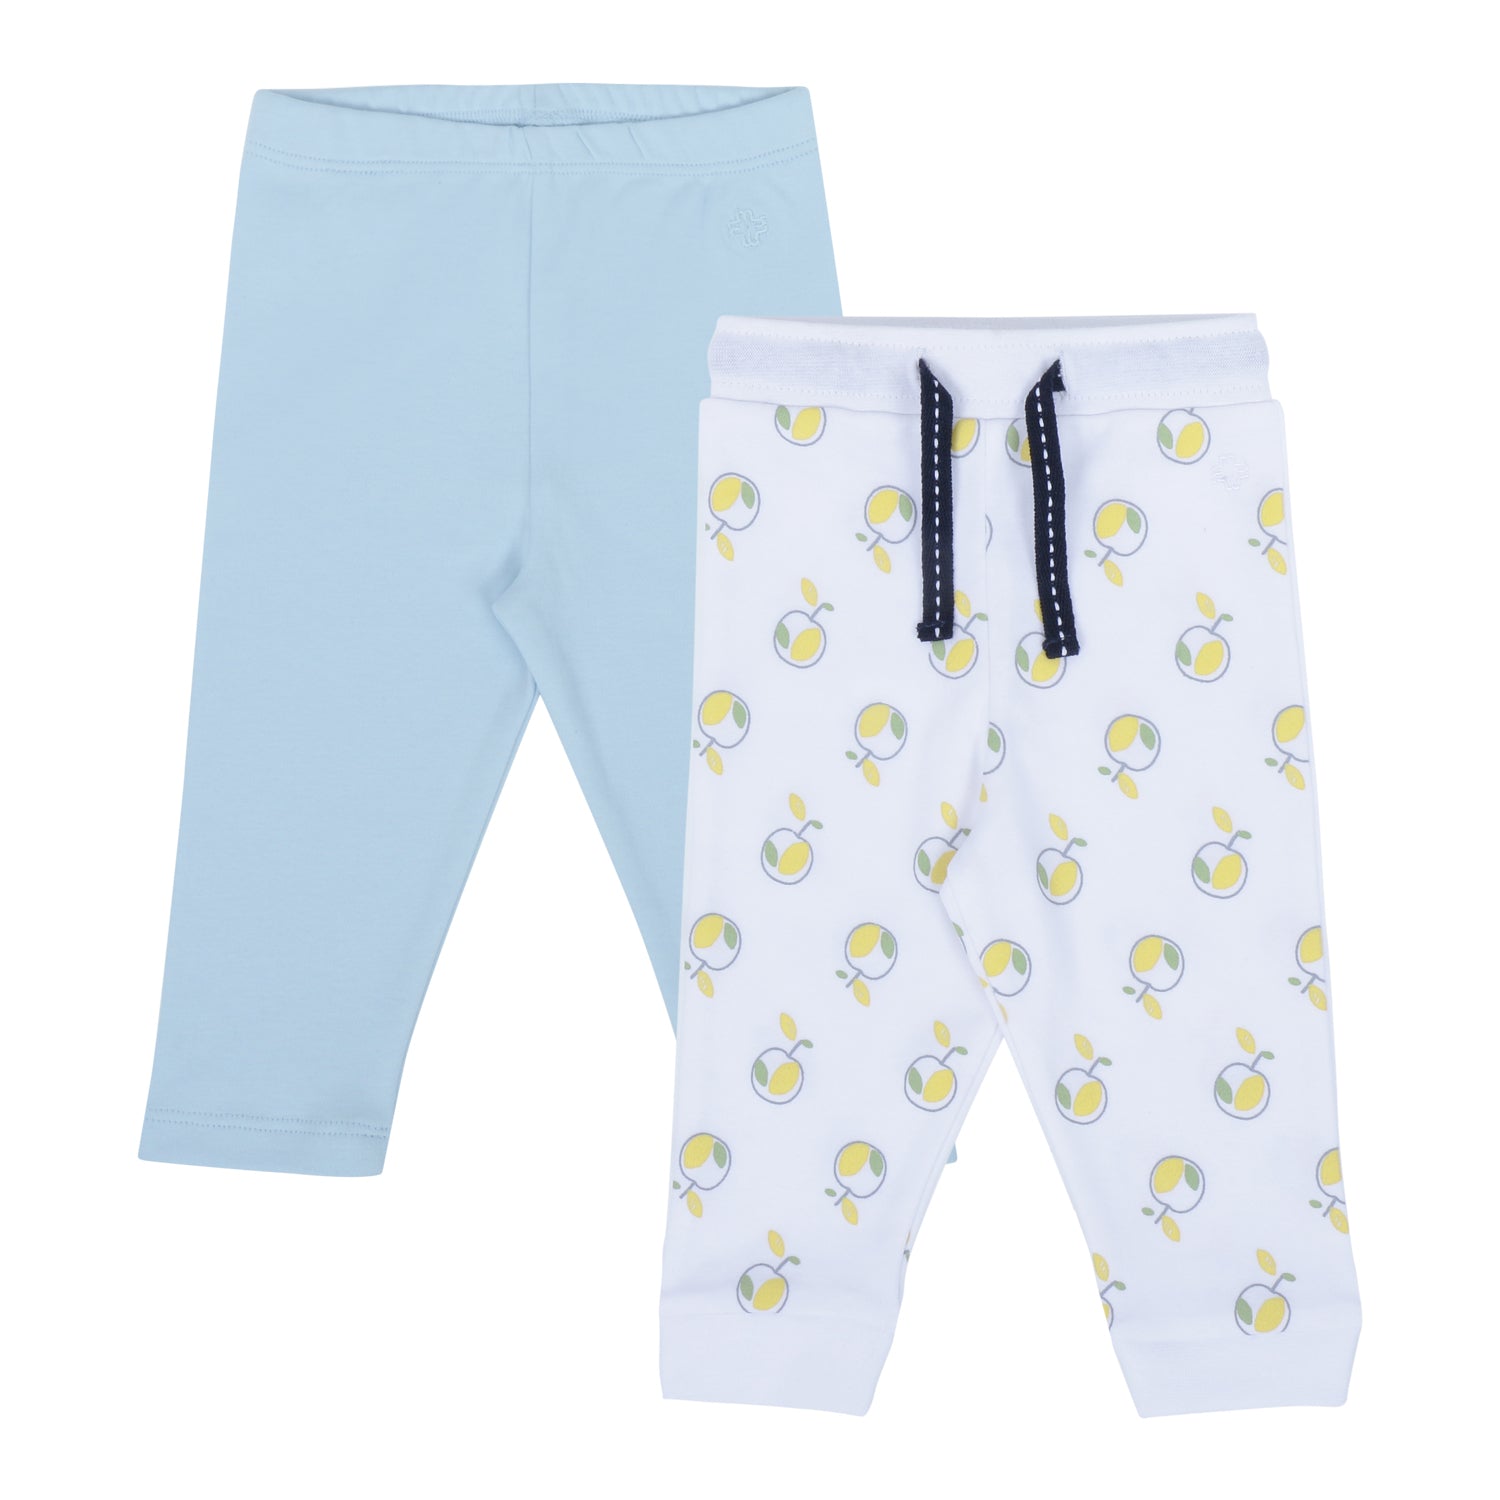 My Milestones Joggers - White Apples/ Baby Blue - 2 PC Pack